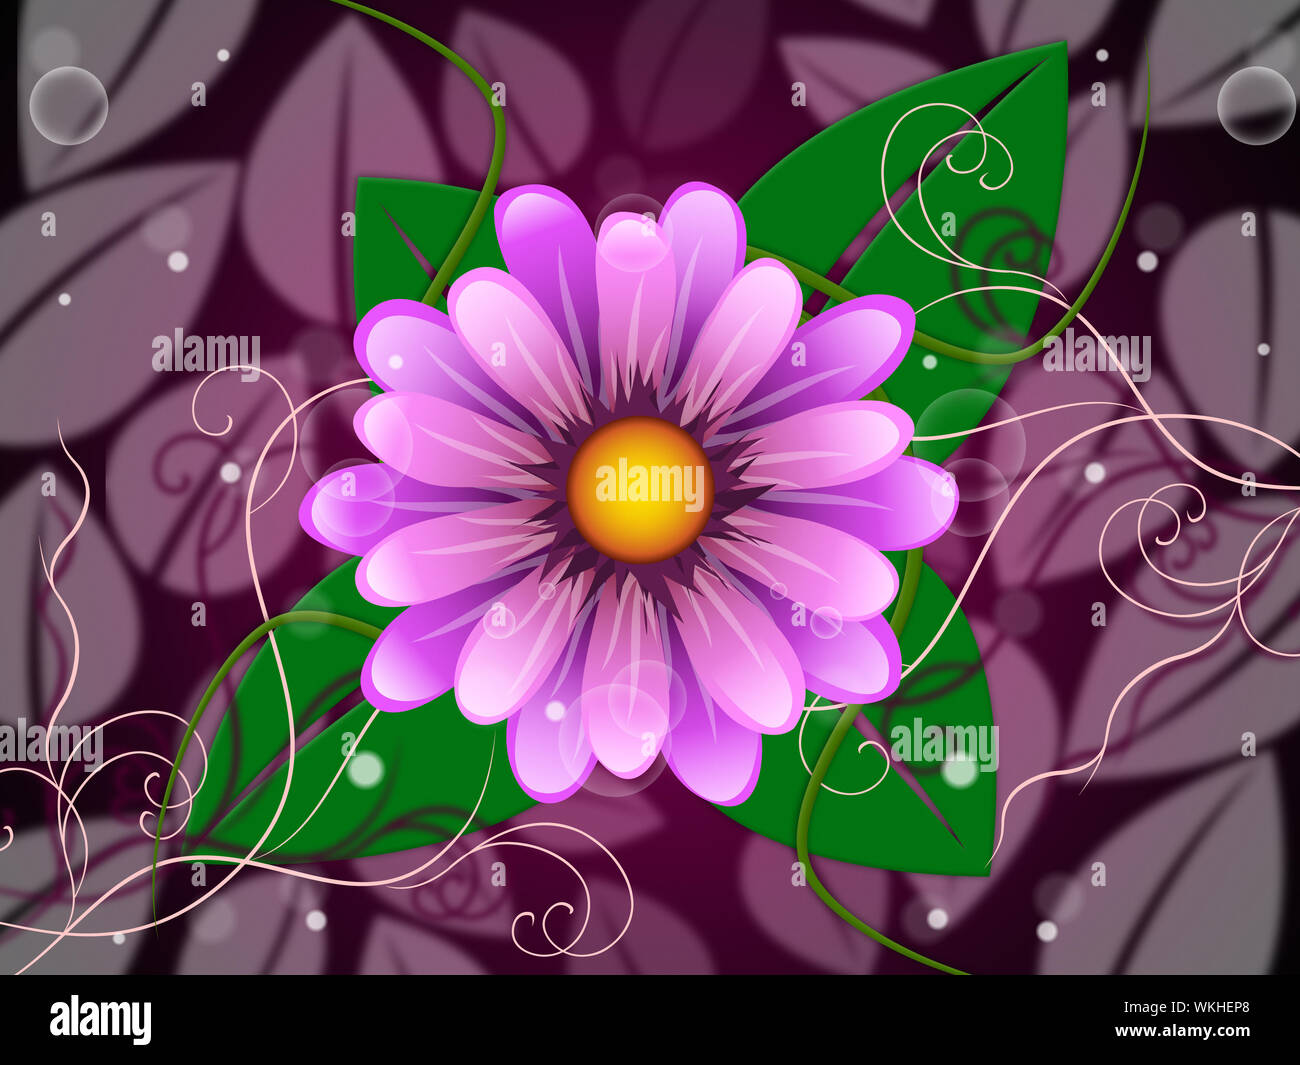 Background Leaves Meaning Bloom Flower And Design Stock Photo - Alamy